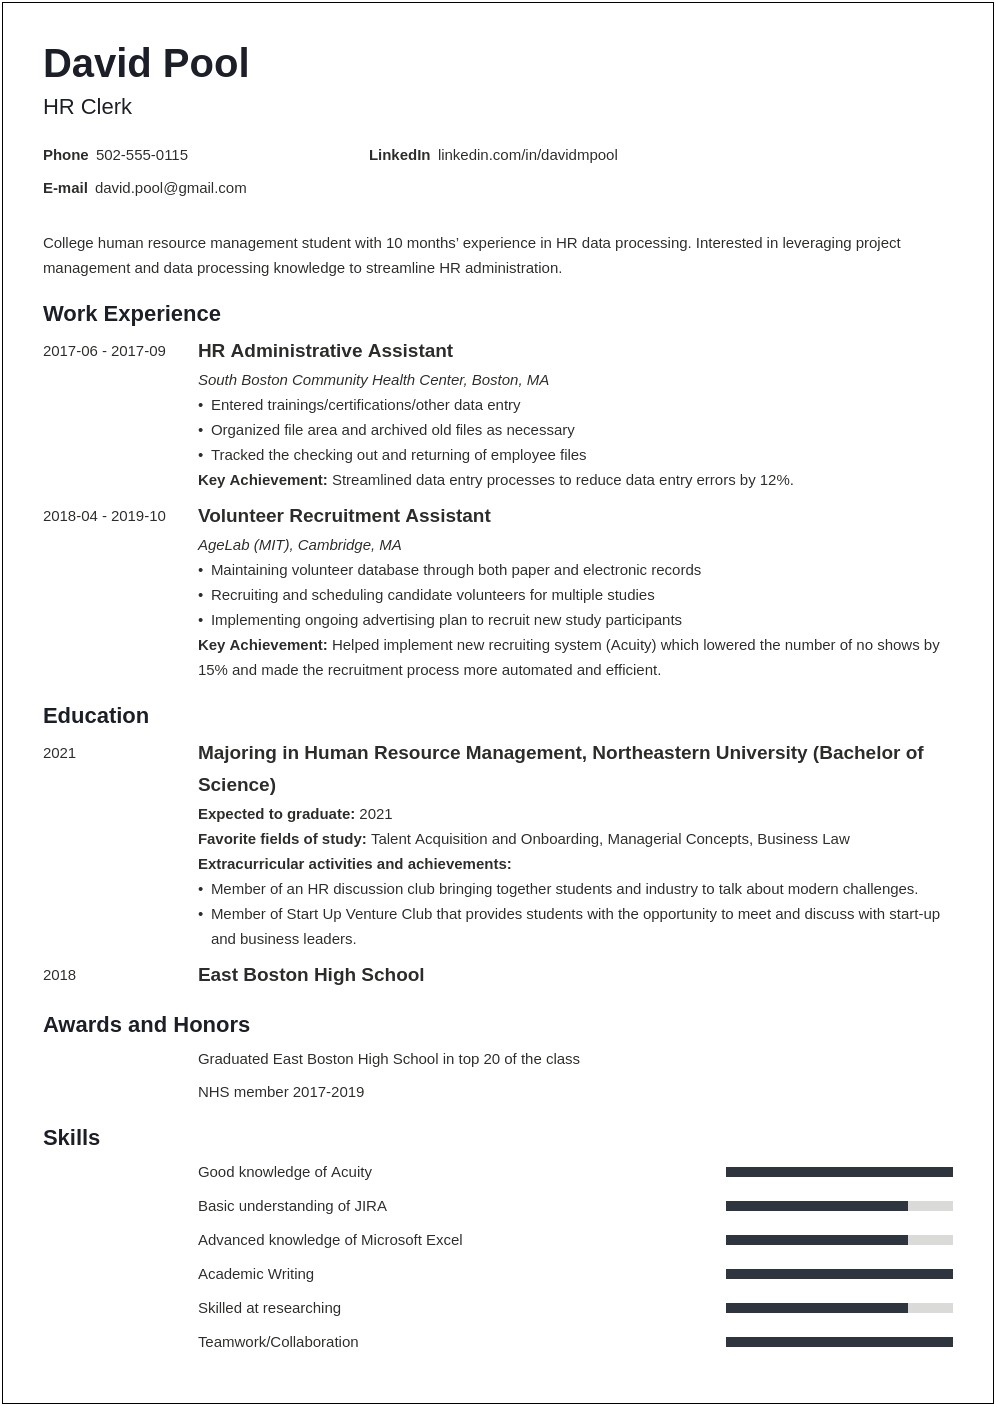 Resume Samples For Summer Jobs For College Students